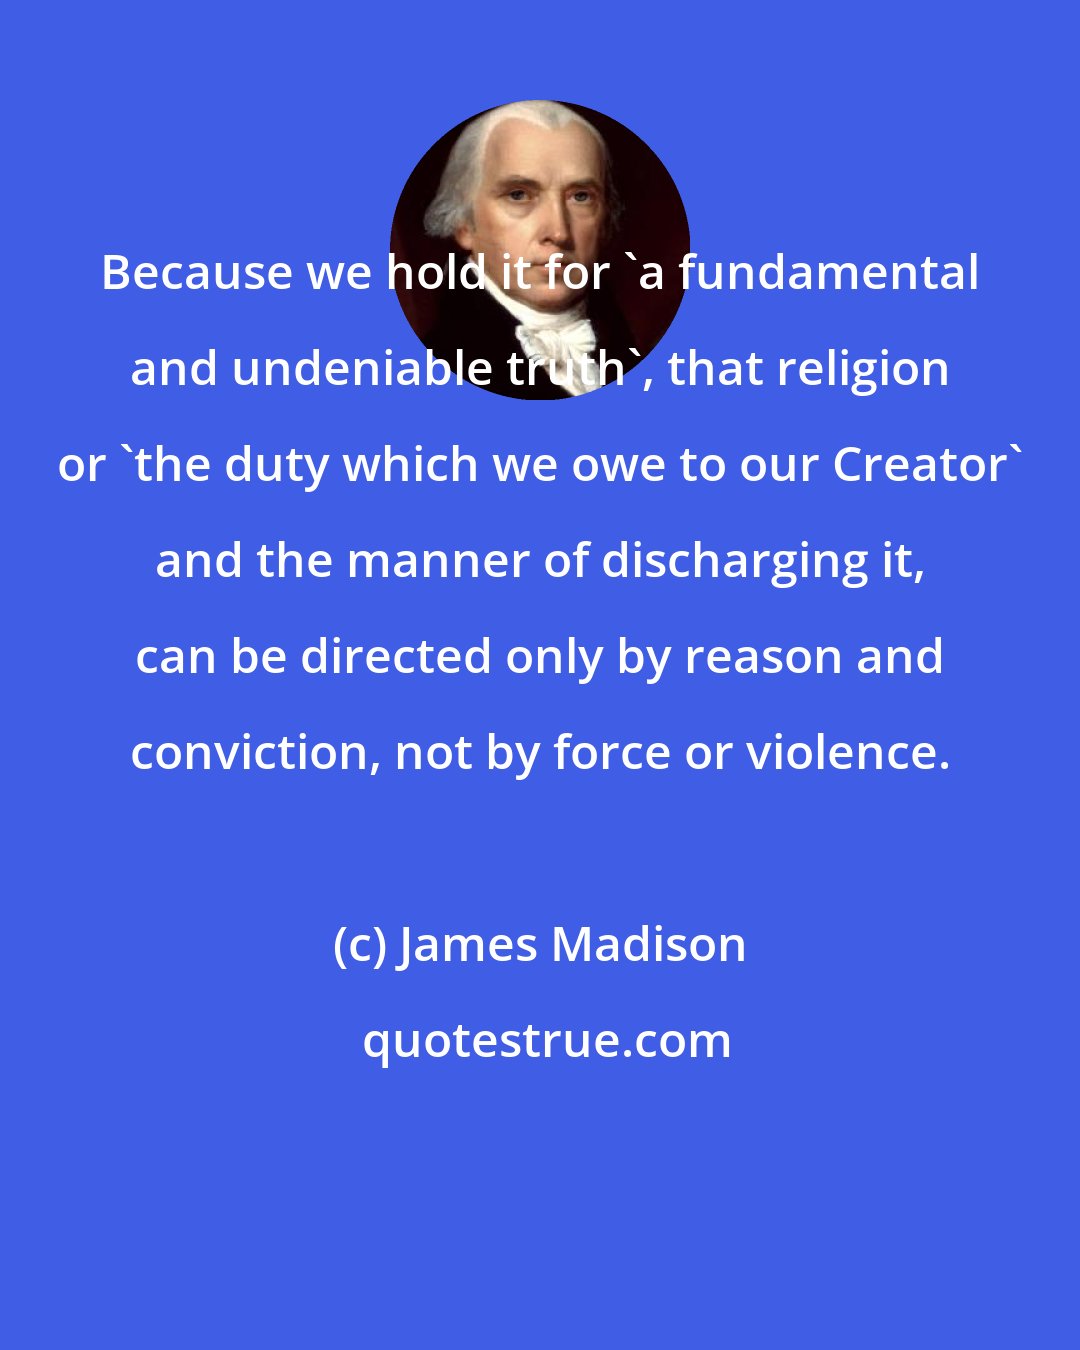 James Madison: Because we hold it for 'a fundamental and undeniable truth', that religion or 'the duty which we owe to our Creator' and the manner of discharging it, can be directed only by reason and conviction, not by force or violence.